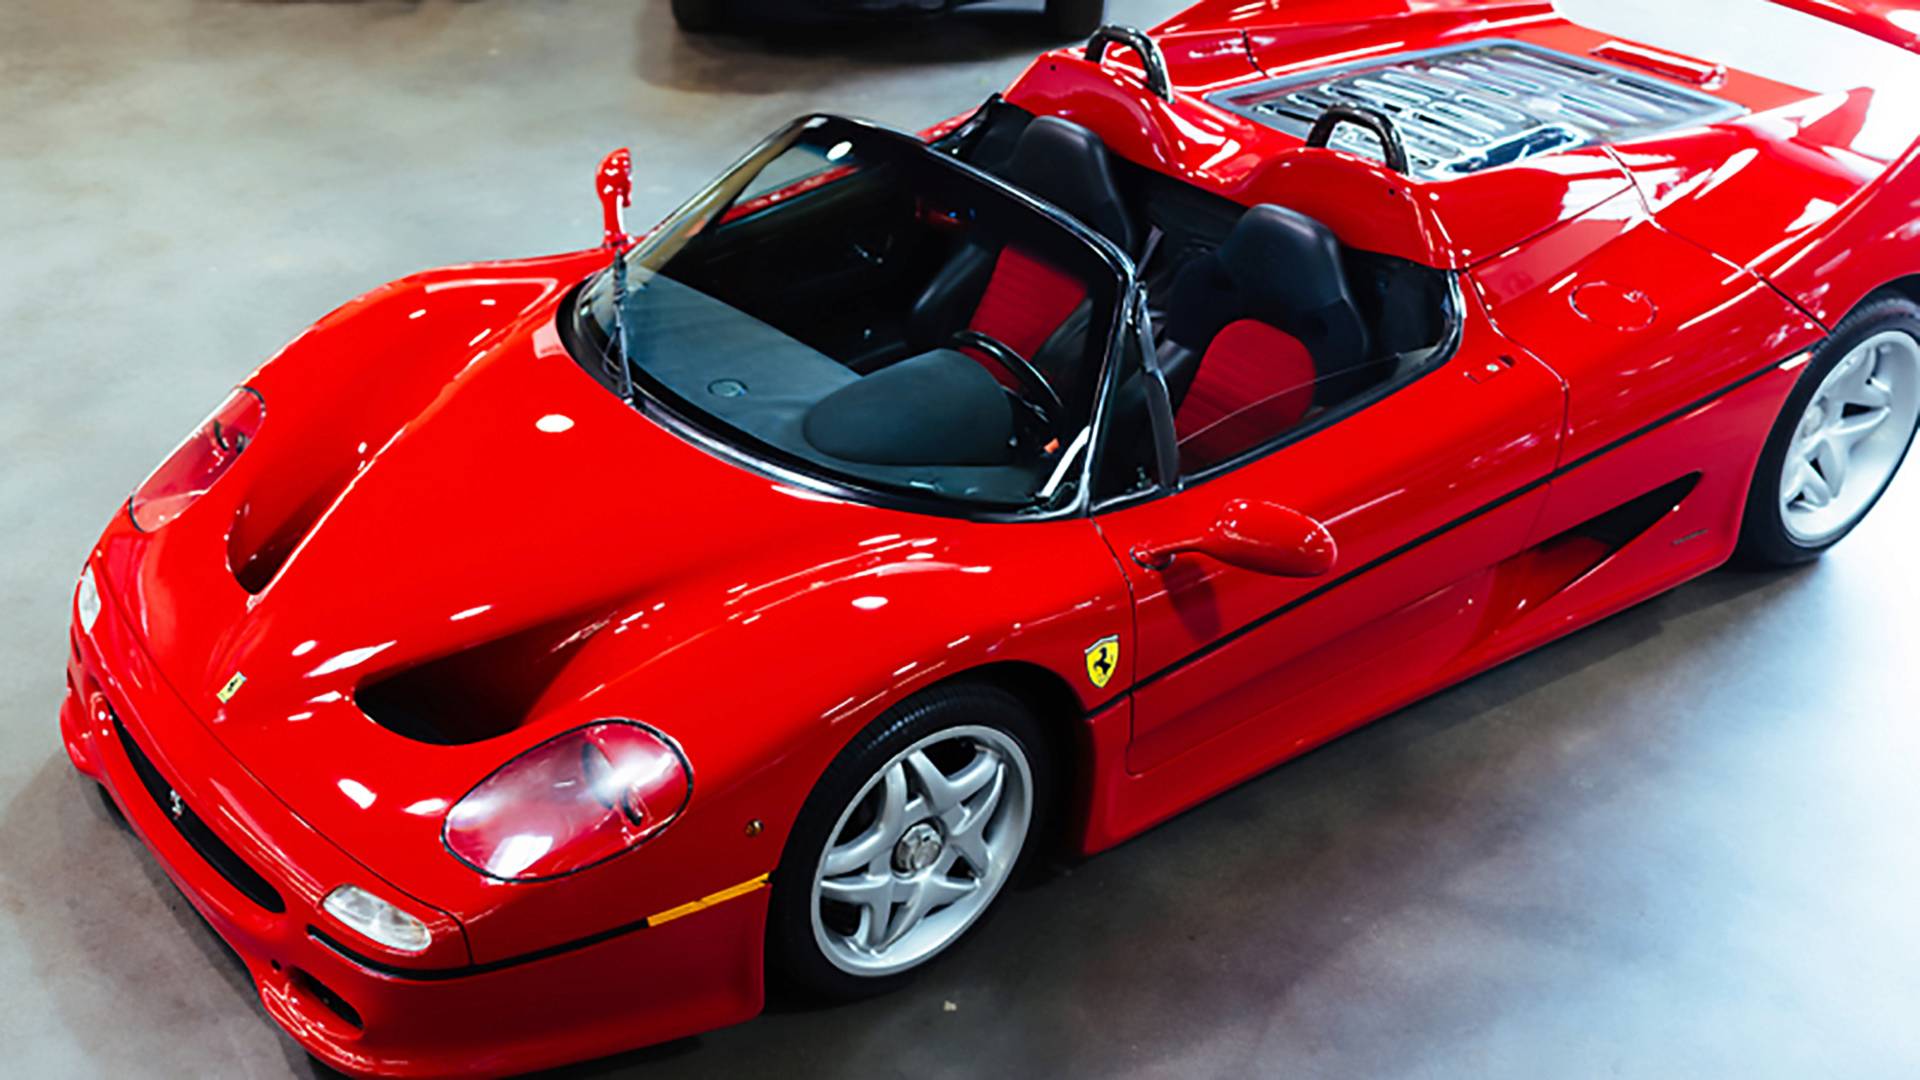 Ferrari F50 prototype with an interesting history is up for grabs